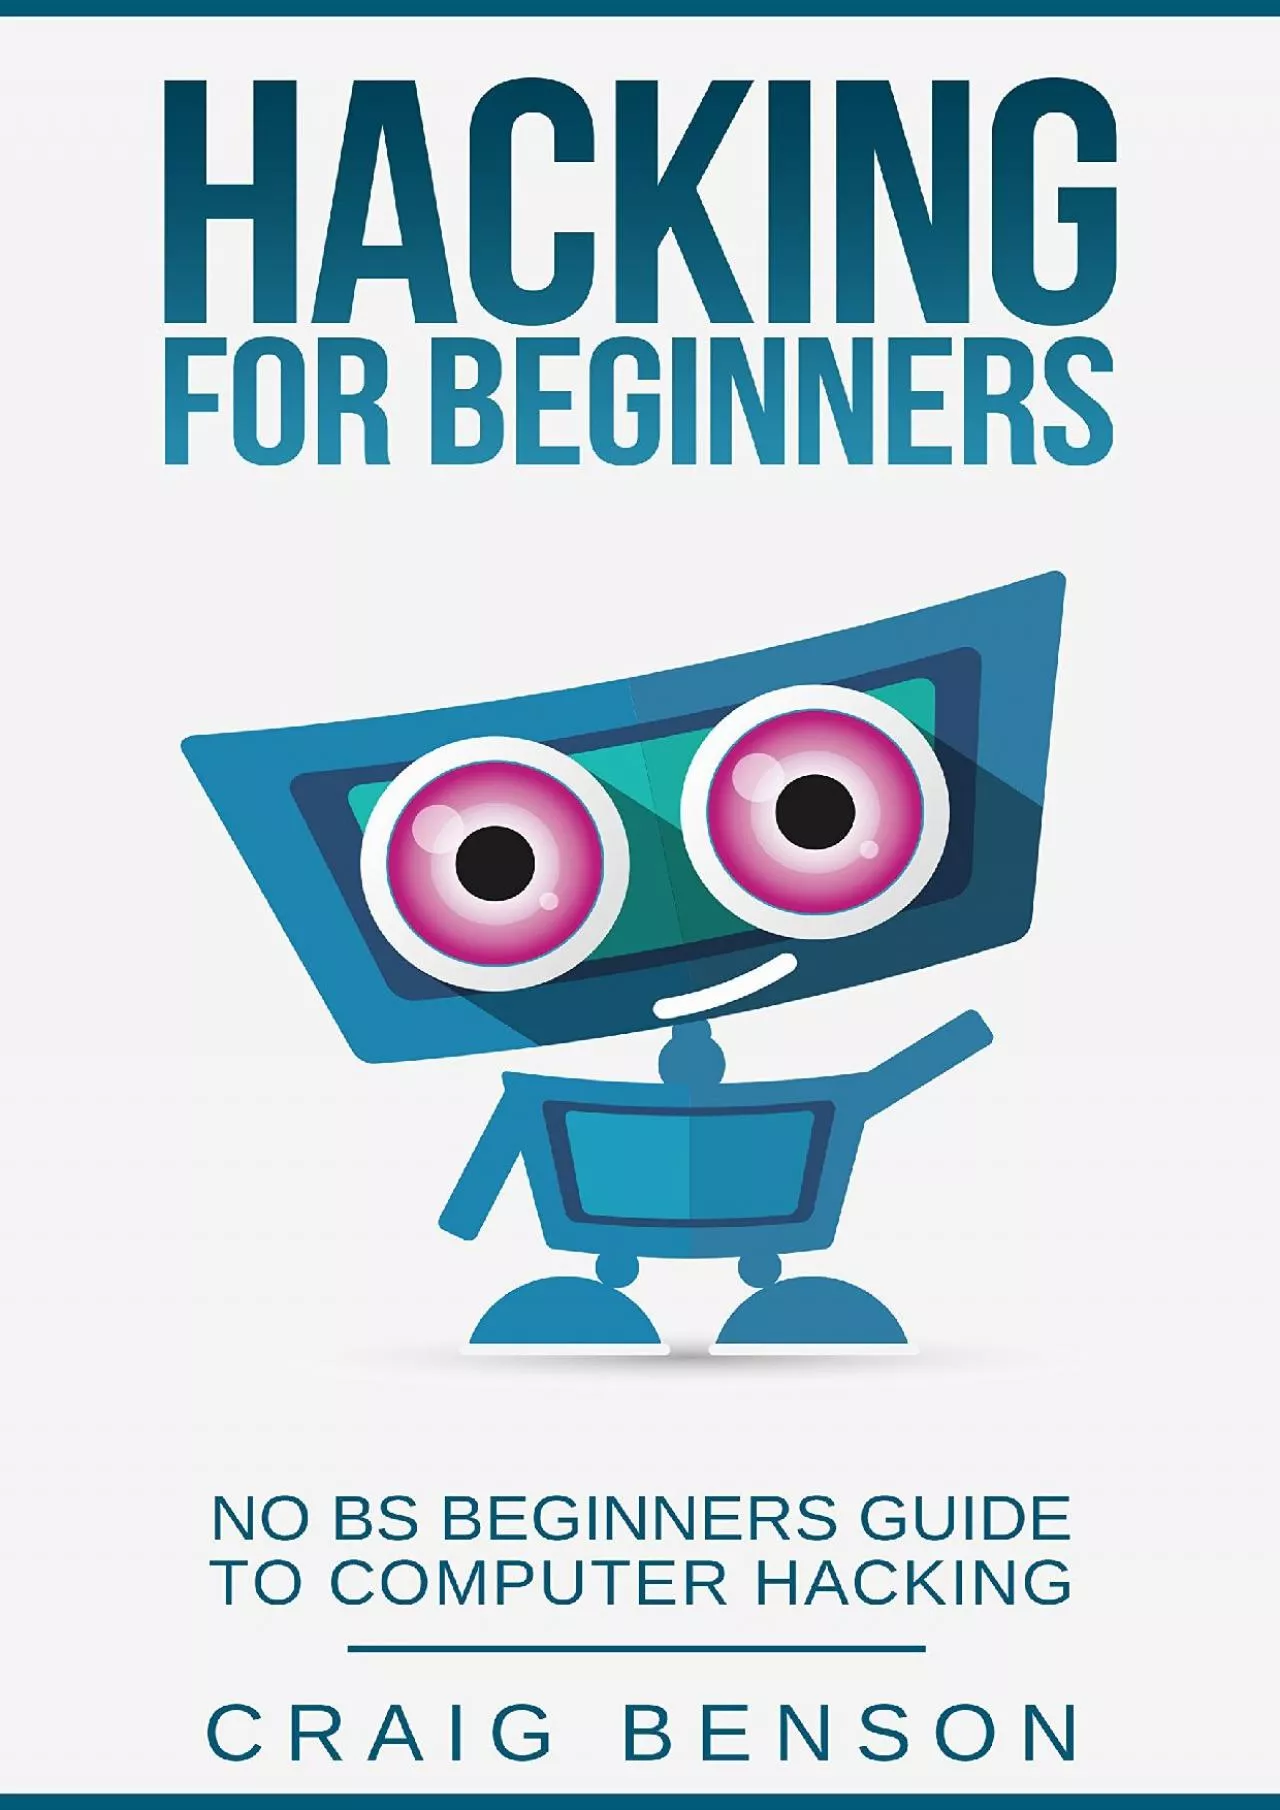 (DOWNLOAD)-Hacking for Beginners: The Ultimate Guide For Newbie Hackers (C, Python, Hacking